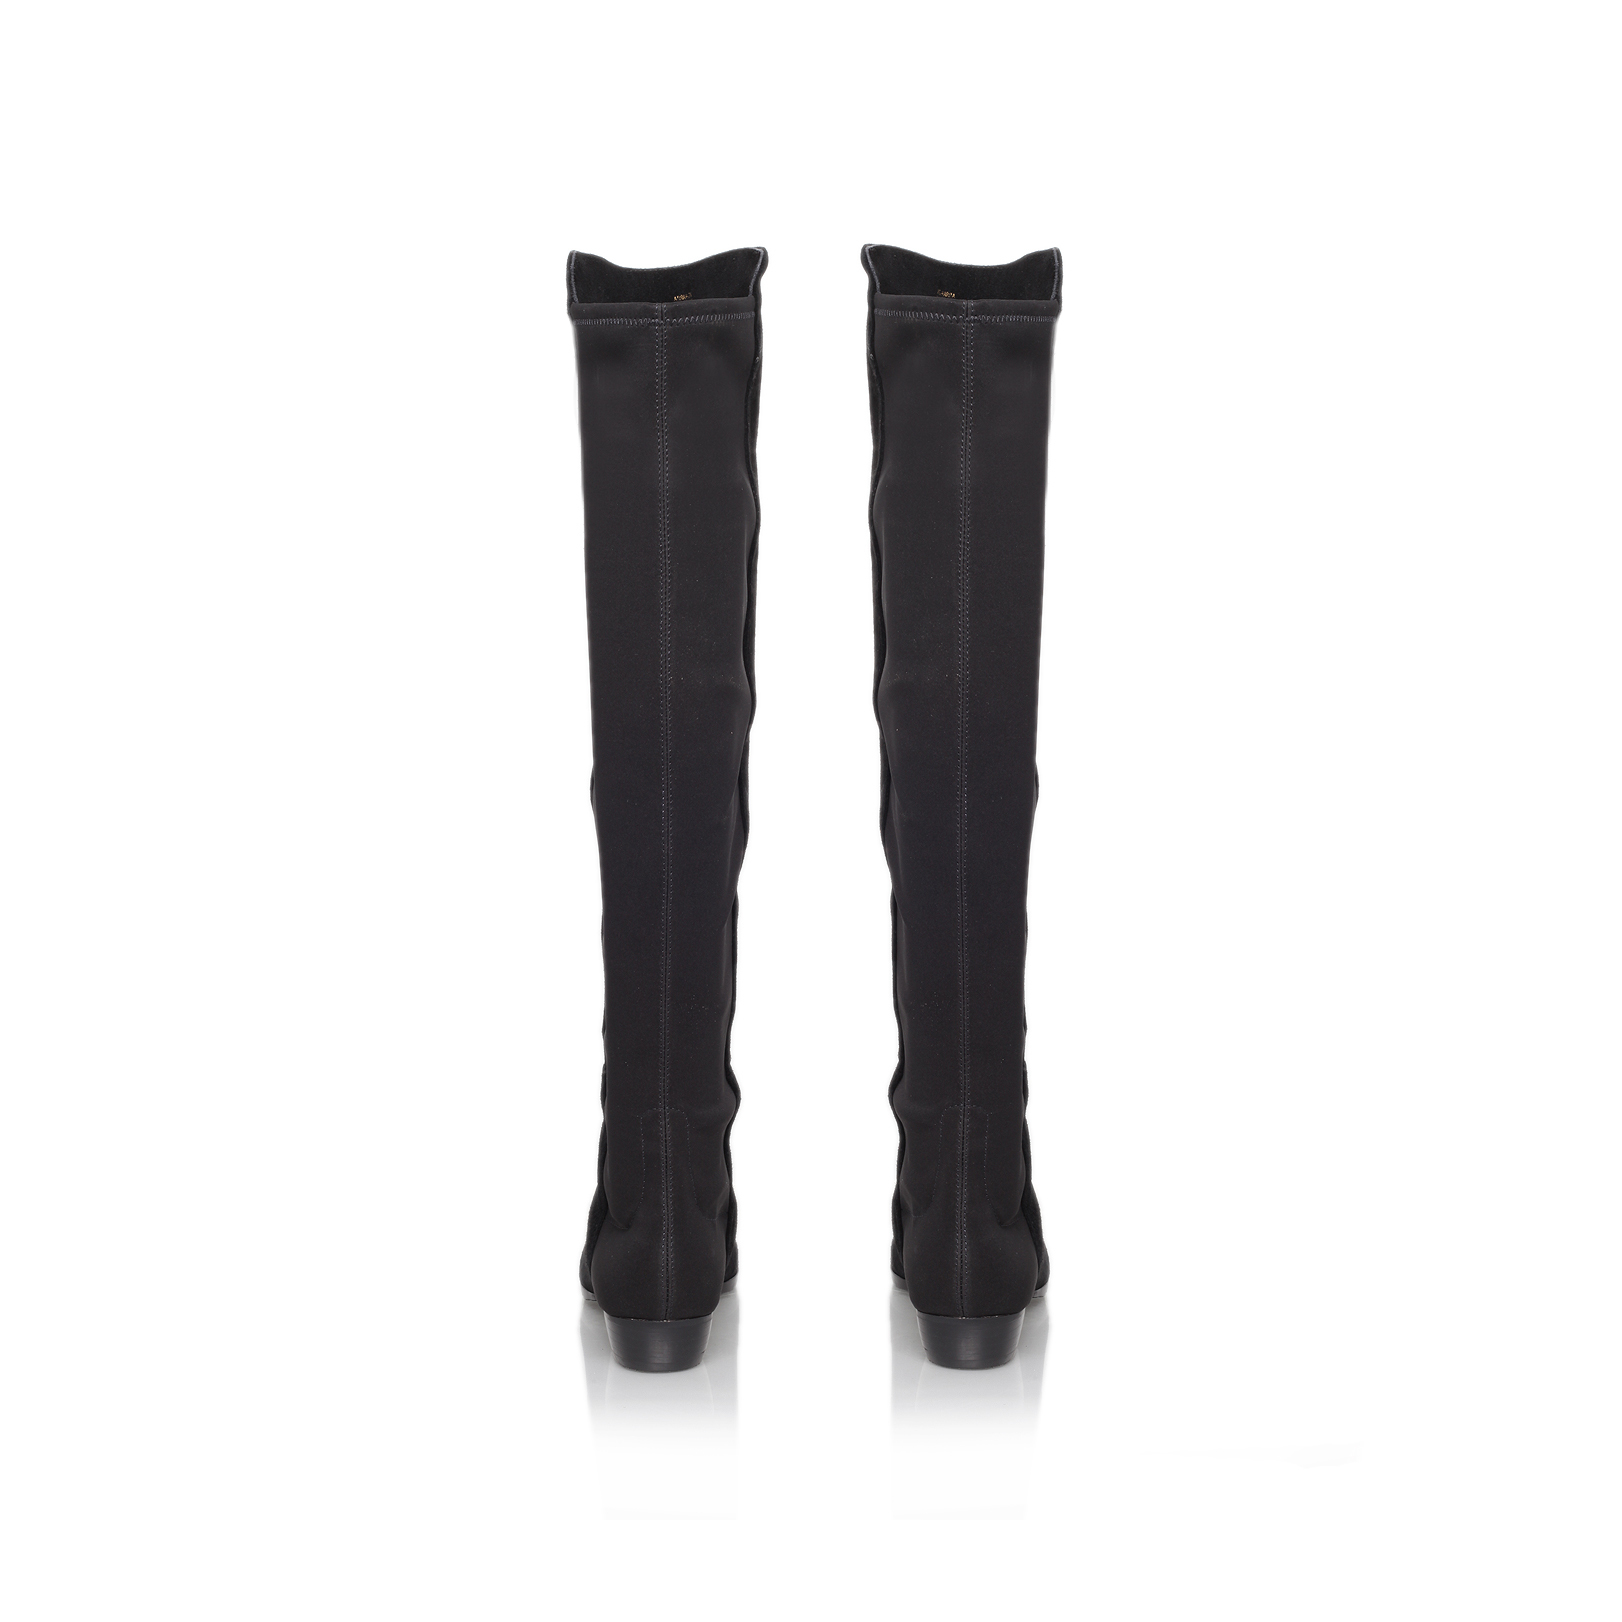 Vince Camuto | KARITA Black Knee High Boots by VINCE CAMUTO